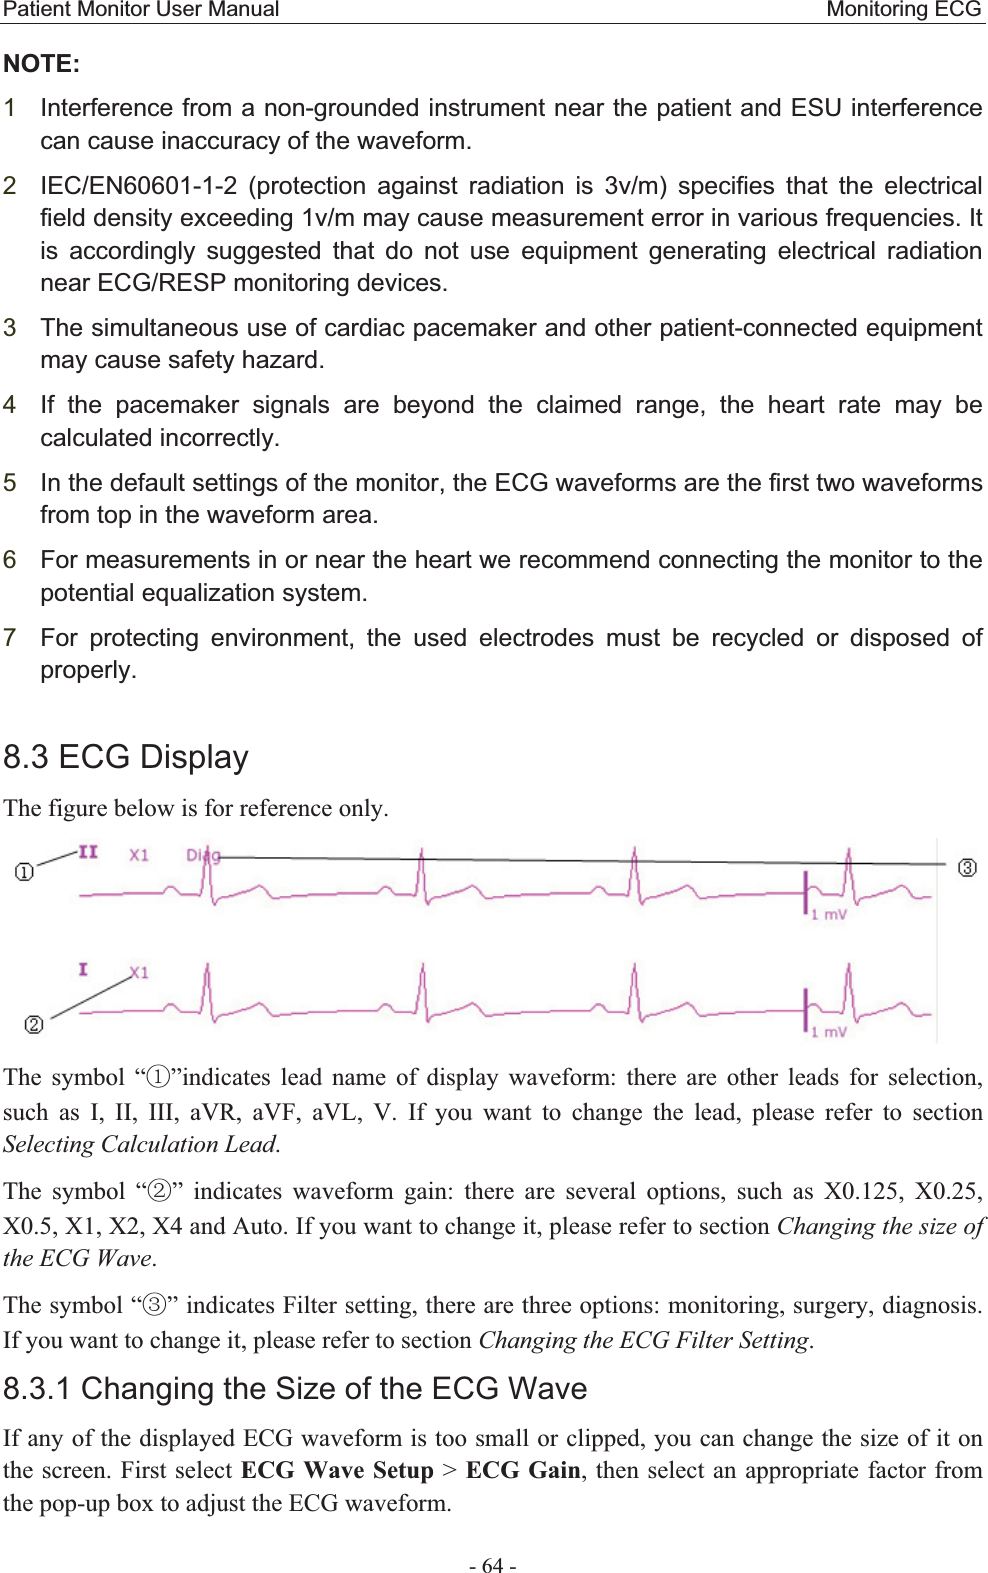 Patient Monitor User Manual                                                  Monitoring ECG  - 64 - NOTE:1Interference from a non-grounded instrument near the patient and ESU interference can cause inaccuracy of the waveform.   2IEC/EN60601-1-2 (protection against radiation is 3v/m) specifies that the electrical field density exceeding 1v/m may cause measurement error in various frequencies. It is accordingly suggested that do not use equipment generating electrical radiation near ECG/RESP monitoring devices. 3The simultaneous use of cardiac pacemaker and other patient-connected equipment may cause safety hazard. 4If the pacemaker signals are beyond the claimed range, the heart rate may be calculated incorrectly.   5In the default settings of the monitor, the ECG waveforms are the first two waveforms from top in the waveform area. 6For measurements in or near the heart we recommend connecting the monitor to the potential equalization system. 7For protecting environment, the used electrodes must be recycled or disposed of properly.8.3 ECG Display The figure below is for reference only.    The symbol “ķ”indicates lead name of display waveform: there are other leads for selection, such as I, II, III, aVR, aVF, aVL, V. If you want to change the lead, please refer to section Selecting Calculation Lead. The symbol “ĸ” indicates waveform gain: there are several options, such as X0.125, X0.25, X0.5, X1, X2, X4 and Auto. If you want to change it, please refer to section Changing the size of the ECG Wave. The symbol “Ĺ” indicates Filter setting, there are three options: monitoring, surgery, diagnosis. If you want to change it, please refer to section Changing the ECG Filter Setting. 8.3.1 Changing the Size of the ECG Wave If any of the displayed ECG waveform is too small or clipped, you can change the size of it on the screen. First select ECG Wave Setup &gt; ECG Gain, then select an appropriate factor from the pop-up box to adjust the ECG waveform.   